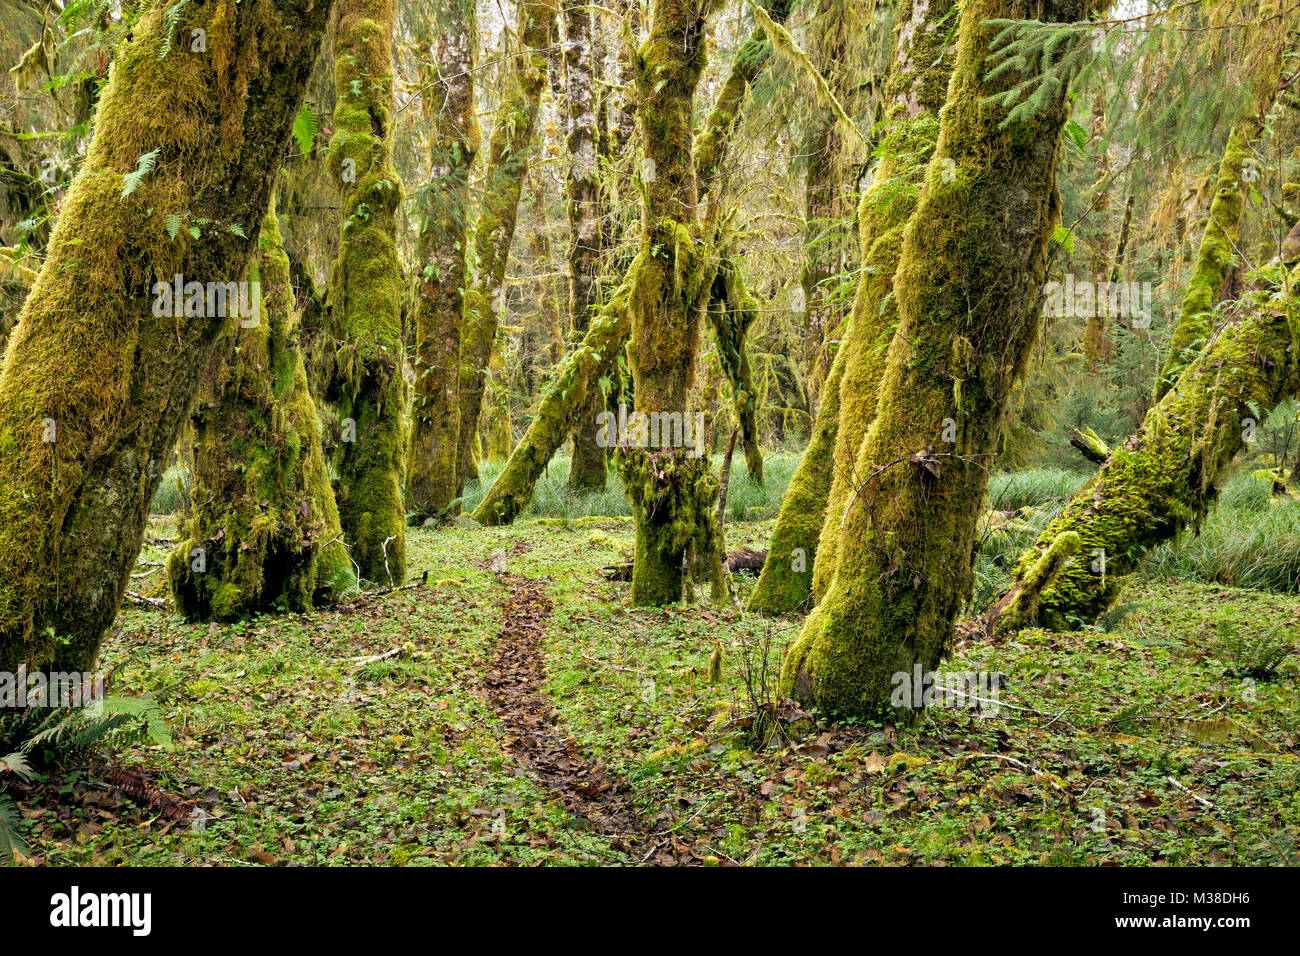 WA13295-00...WASHINGTON - Moss covered trees along Sams River Trail in the Queets Rain Forest of Olympic National Park. Stock Photo